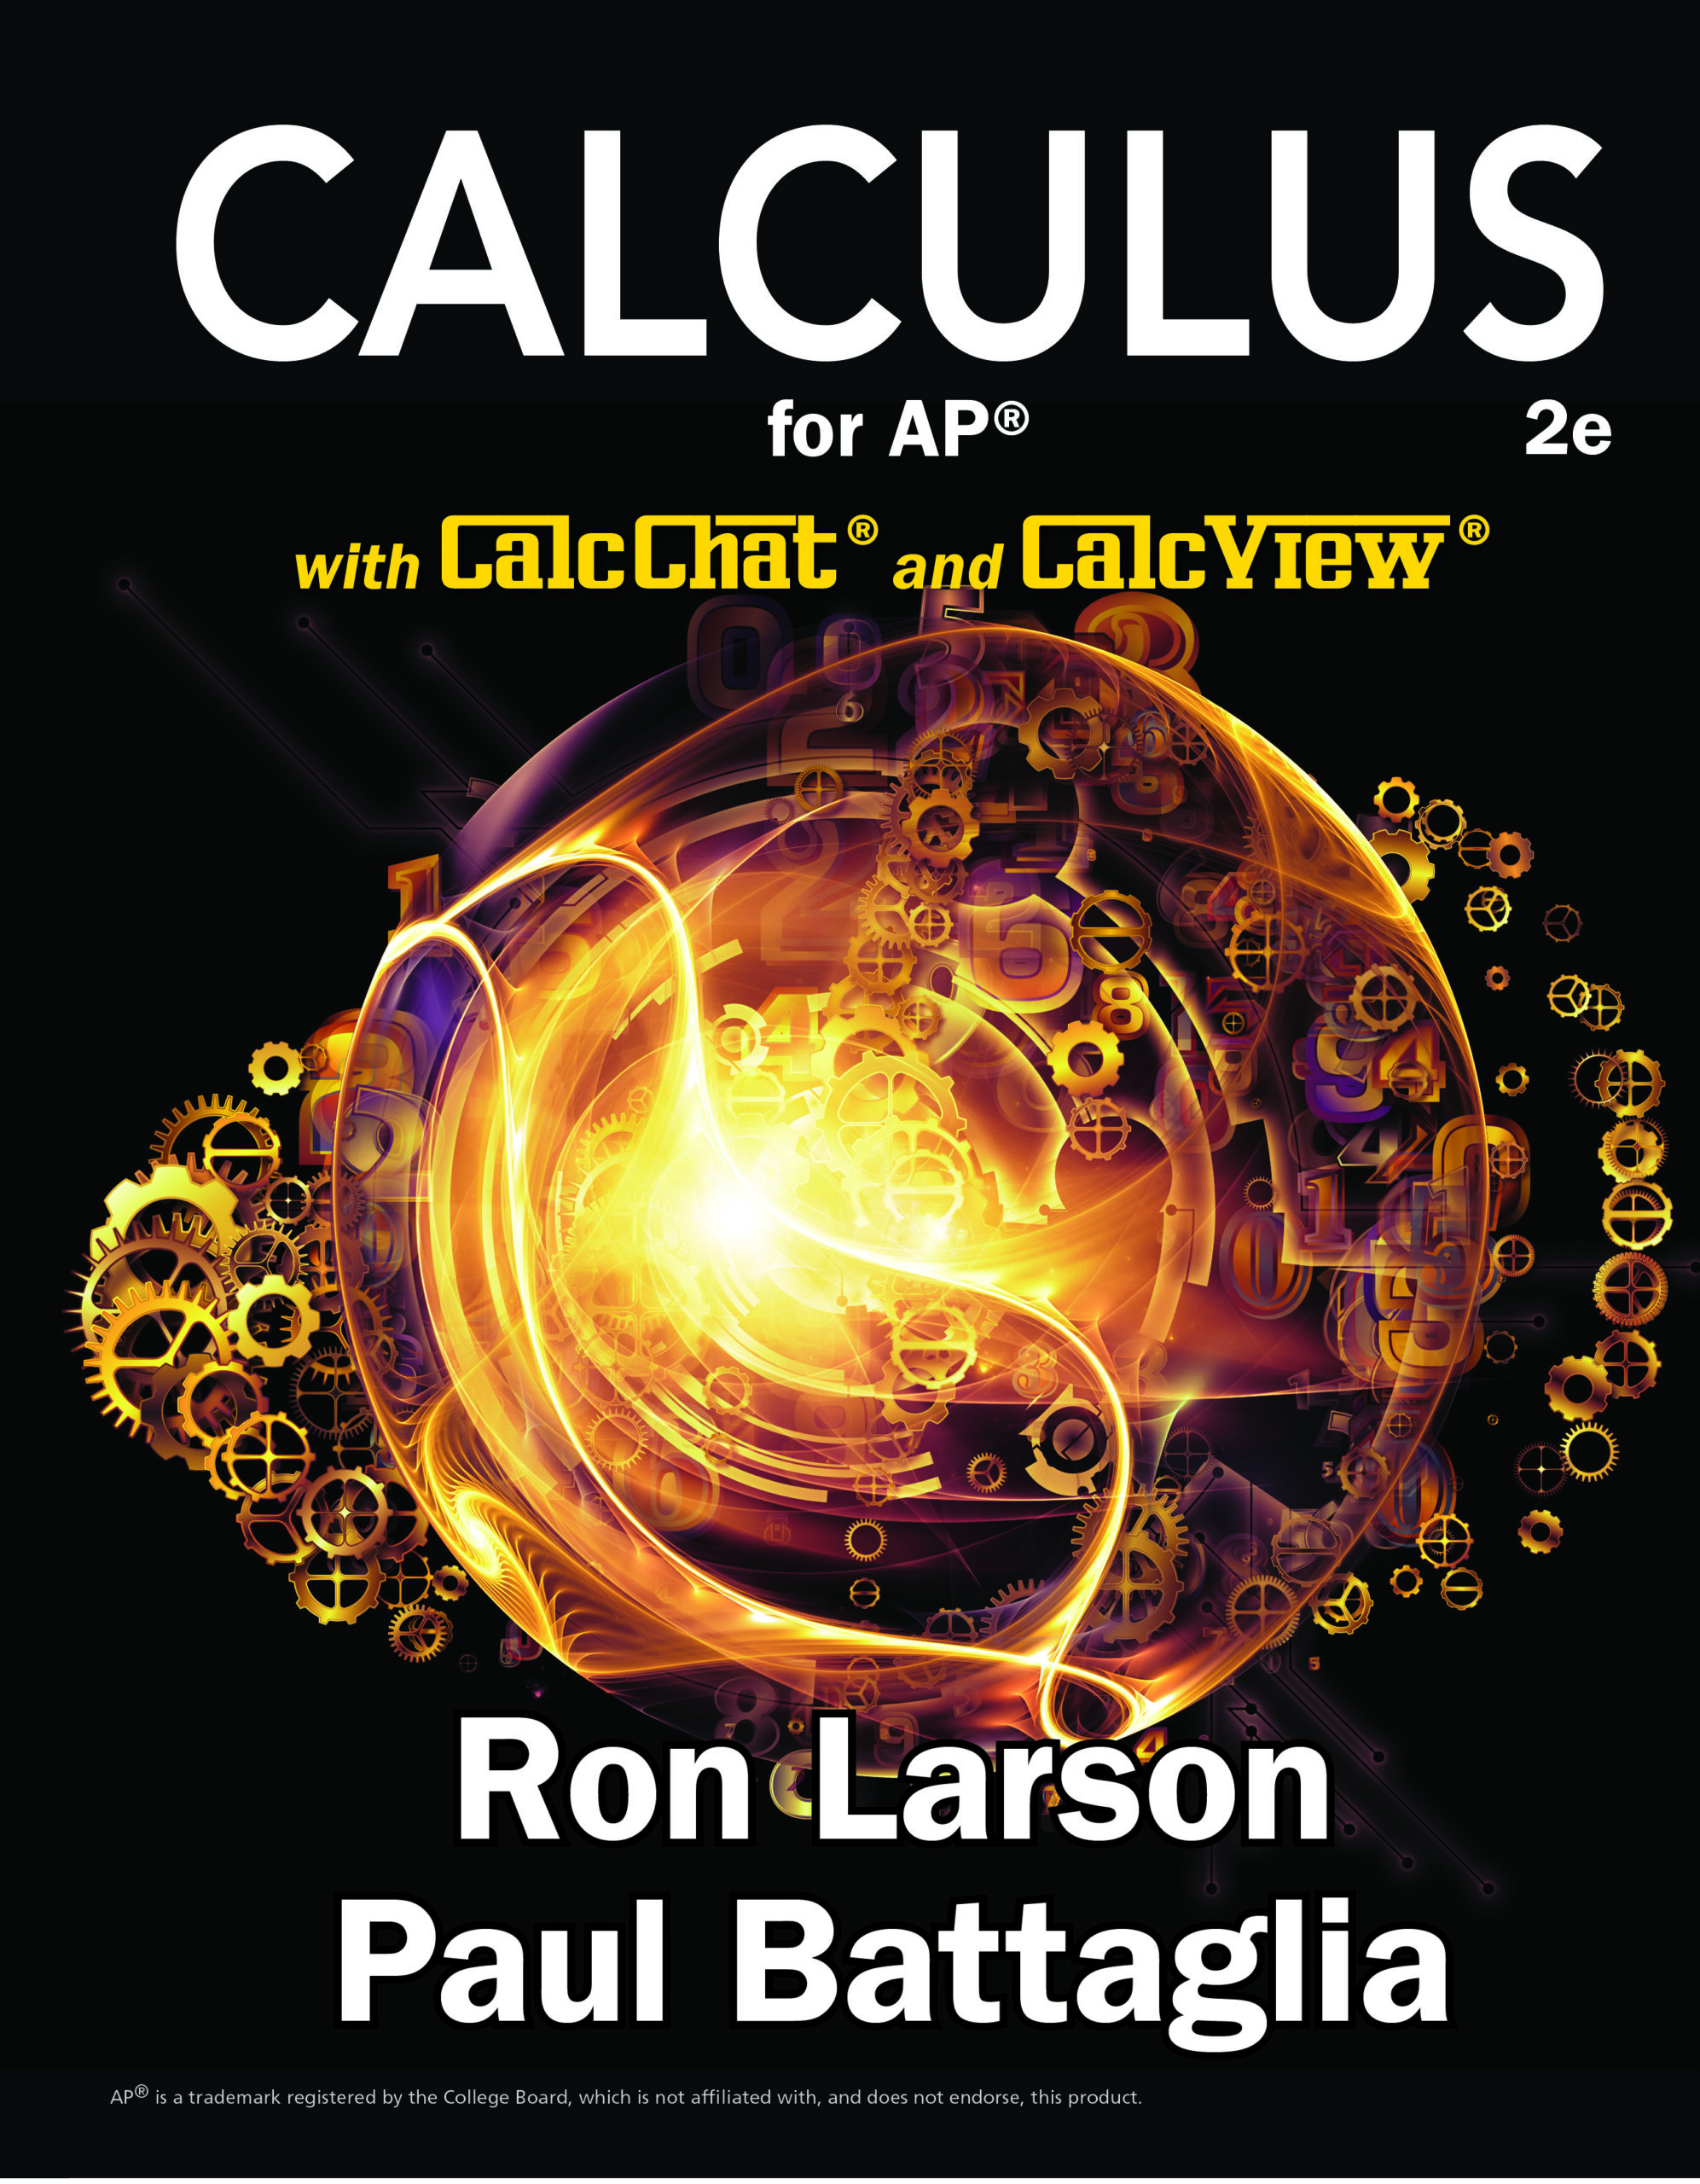 Calculus for AP cover